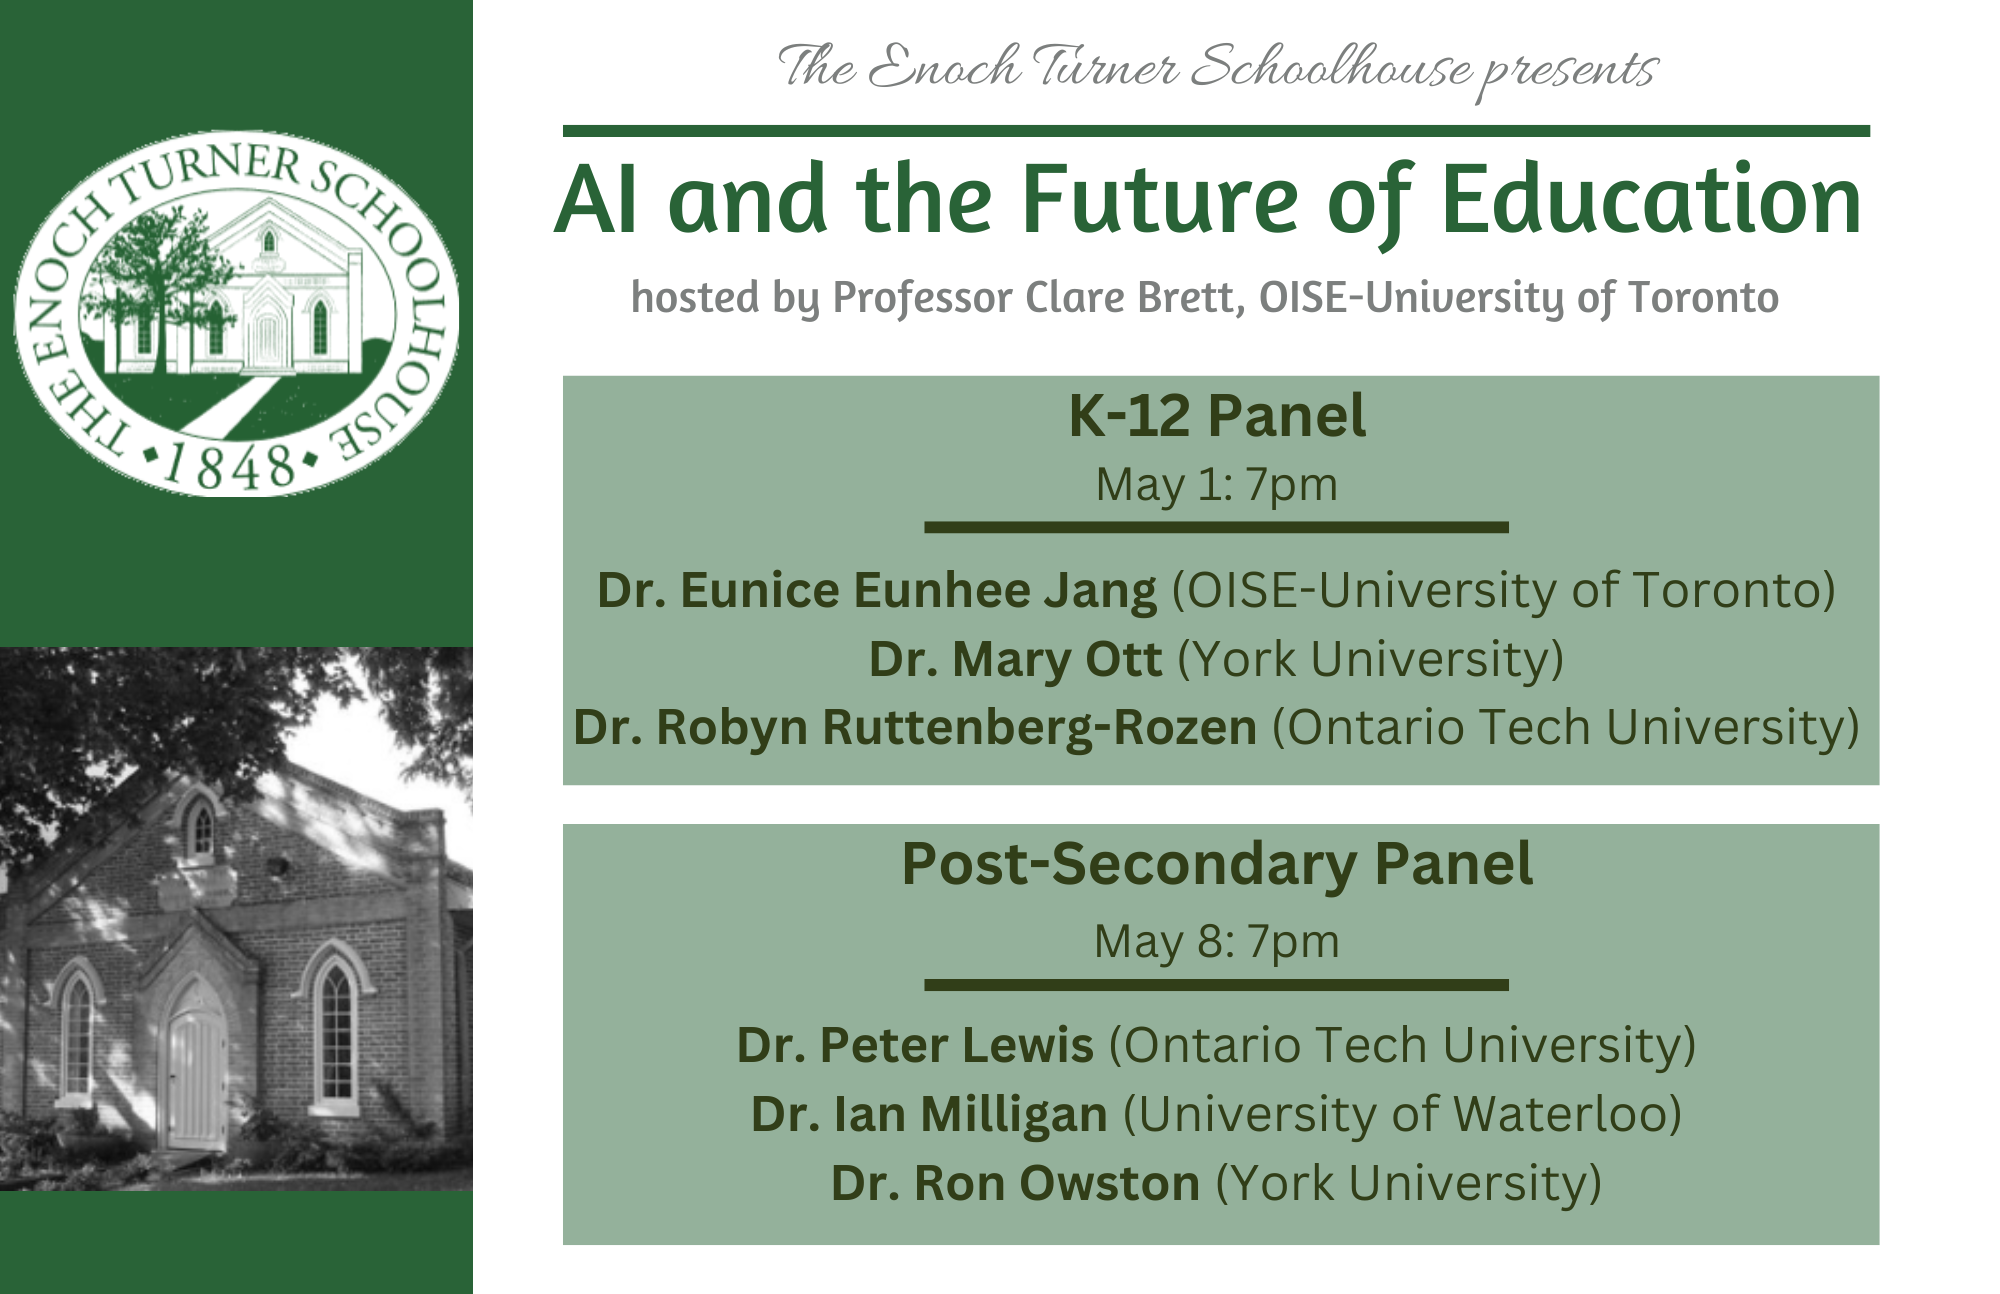 AI and the Future of Education event poster